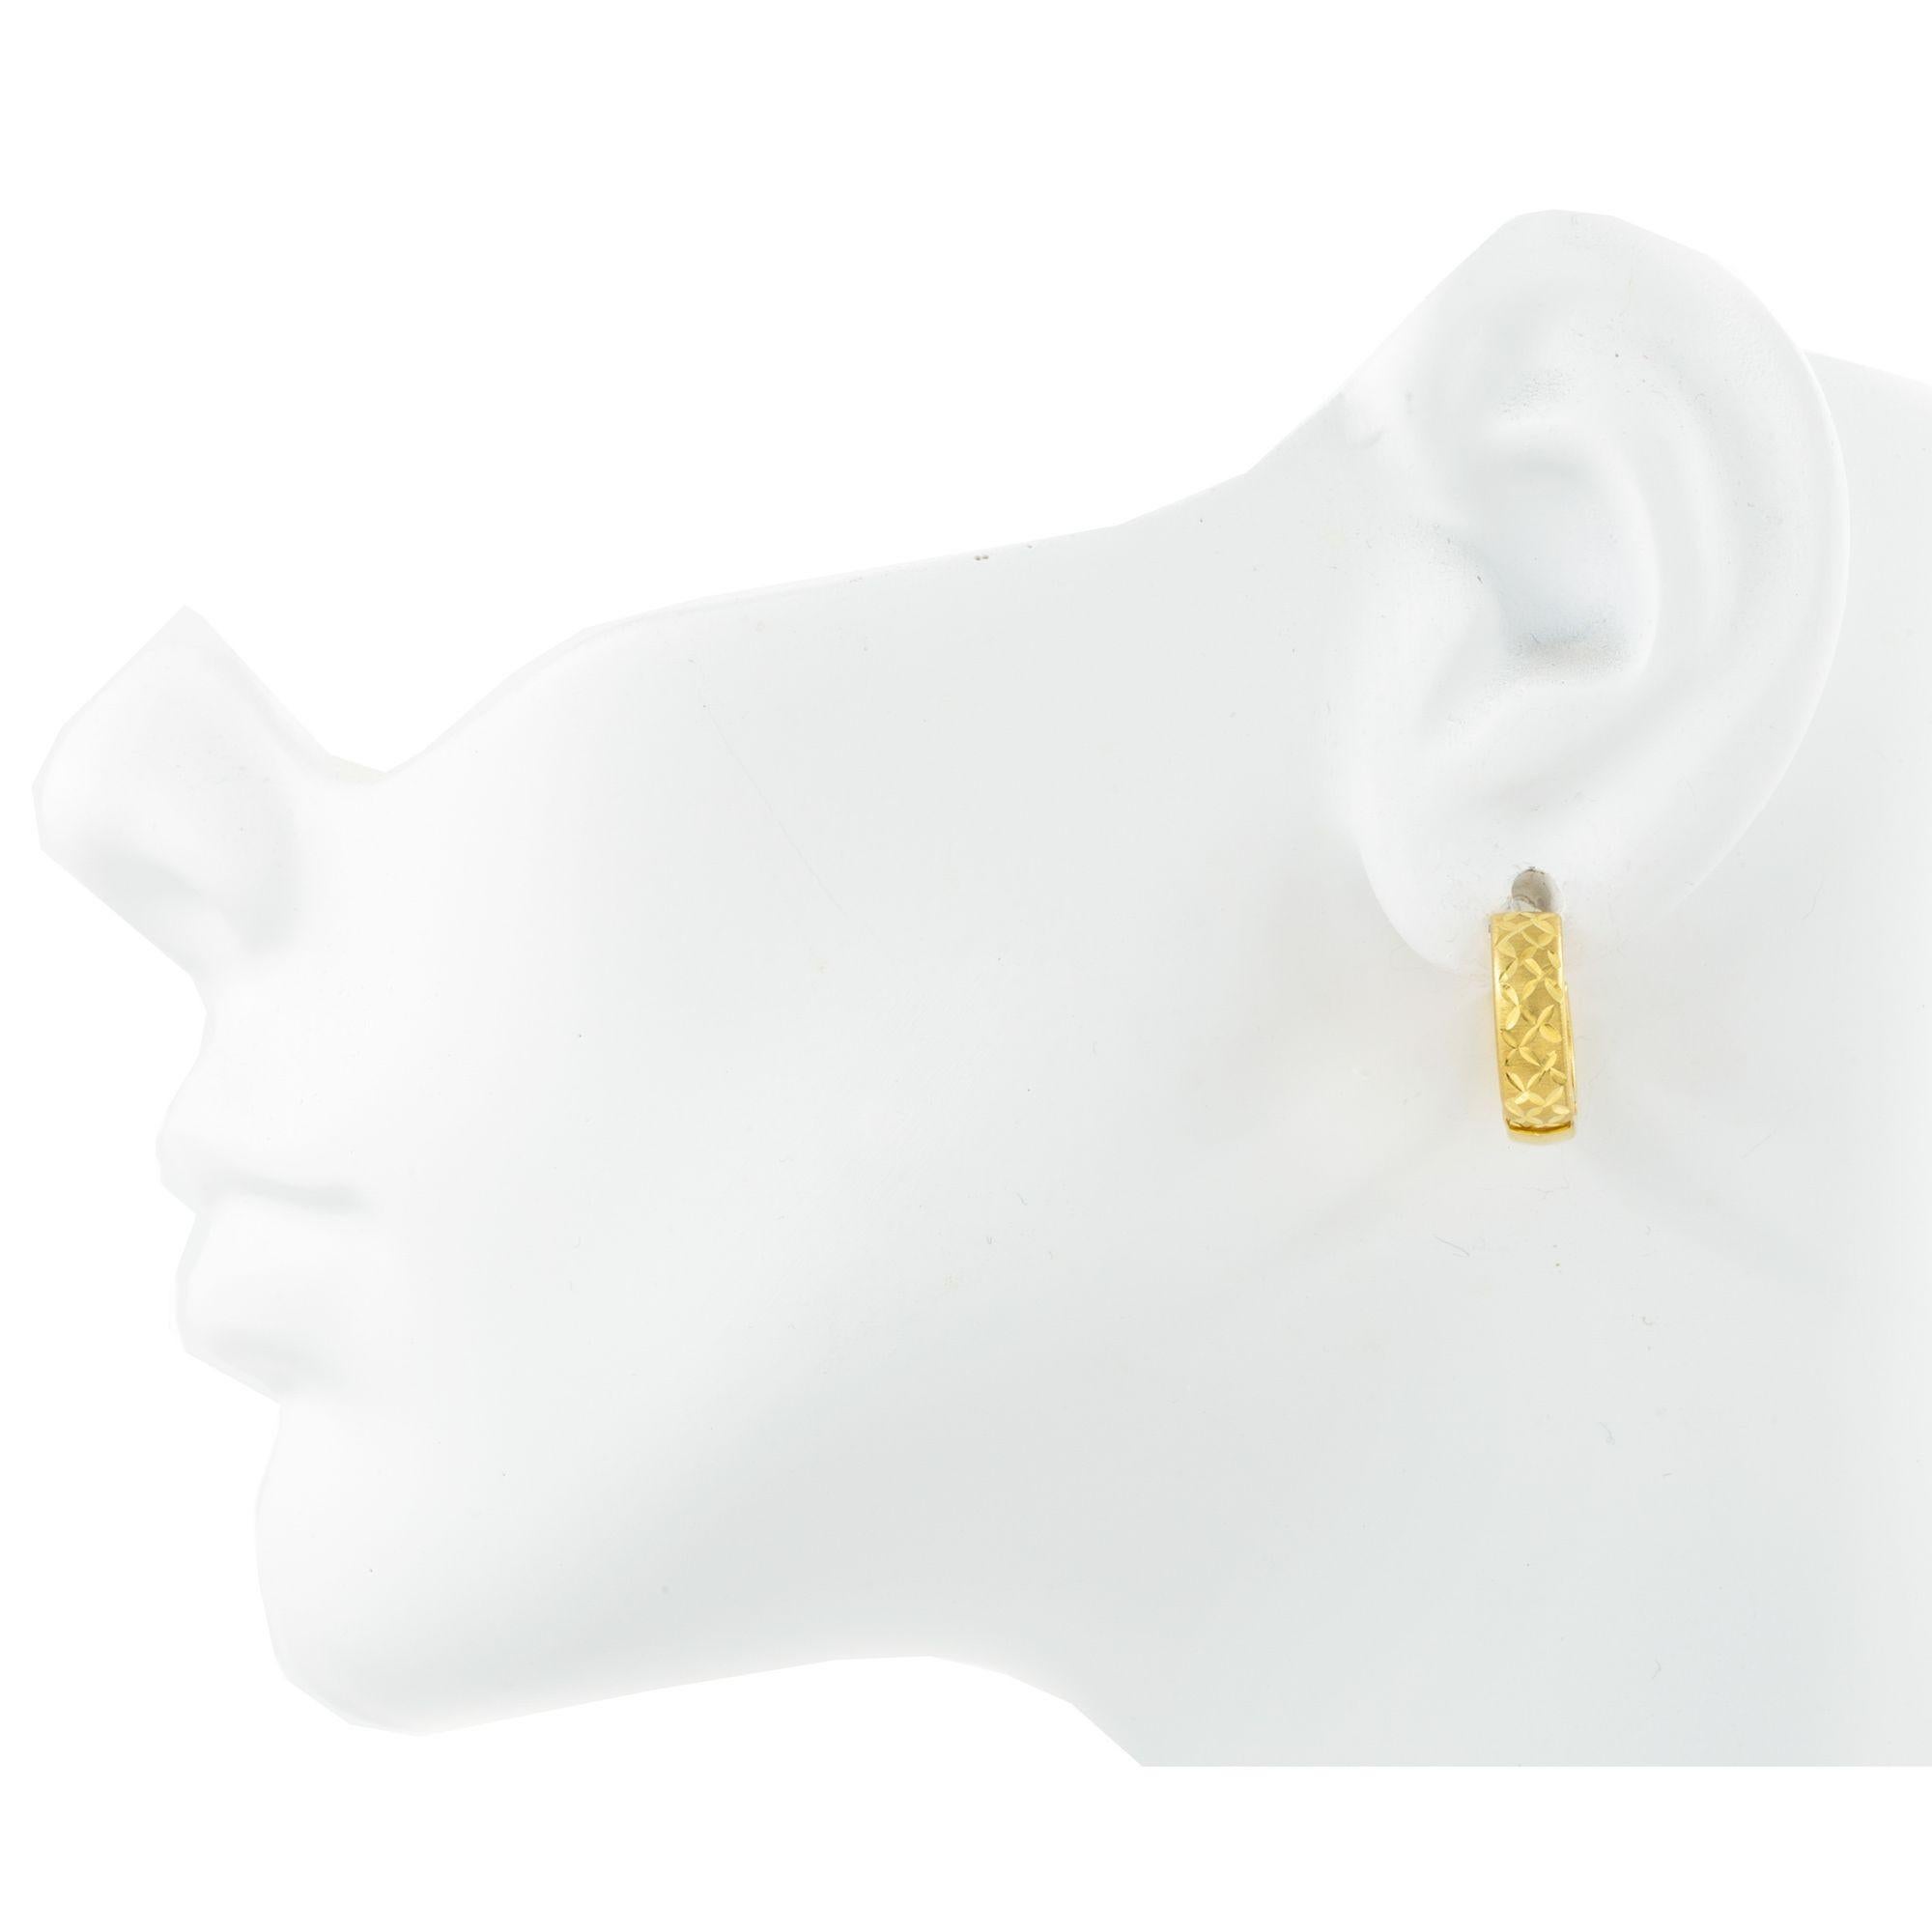 Pair of 18K Yellow Gold Engraved Hoop Earrings
Item # C104605

A pair of 18 karat yellow gold hoop earrings featuring an engraved design. The pattern etched into the gold has a leaf-like motif, which adds texture and visual interest to the earrings.